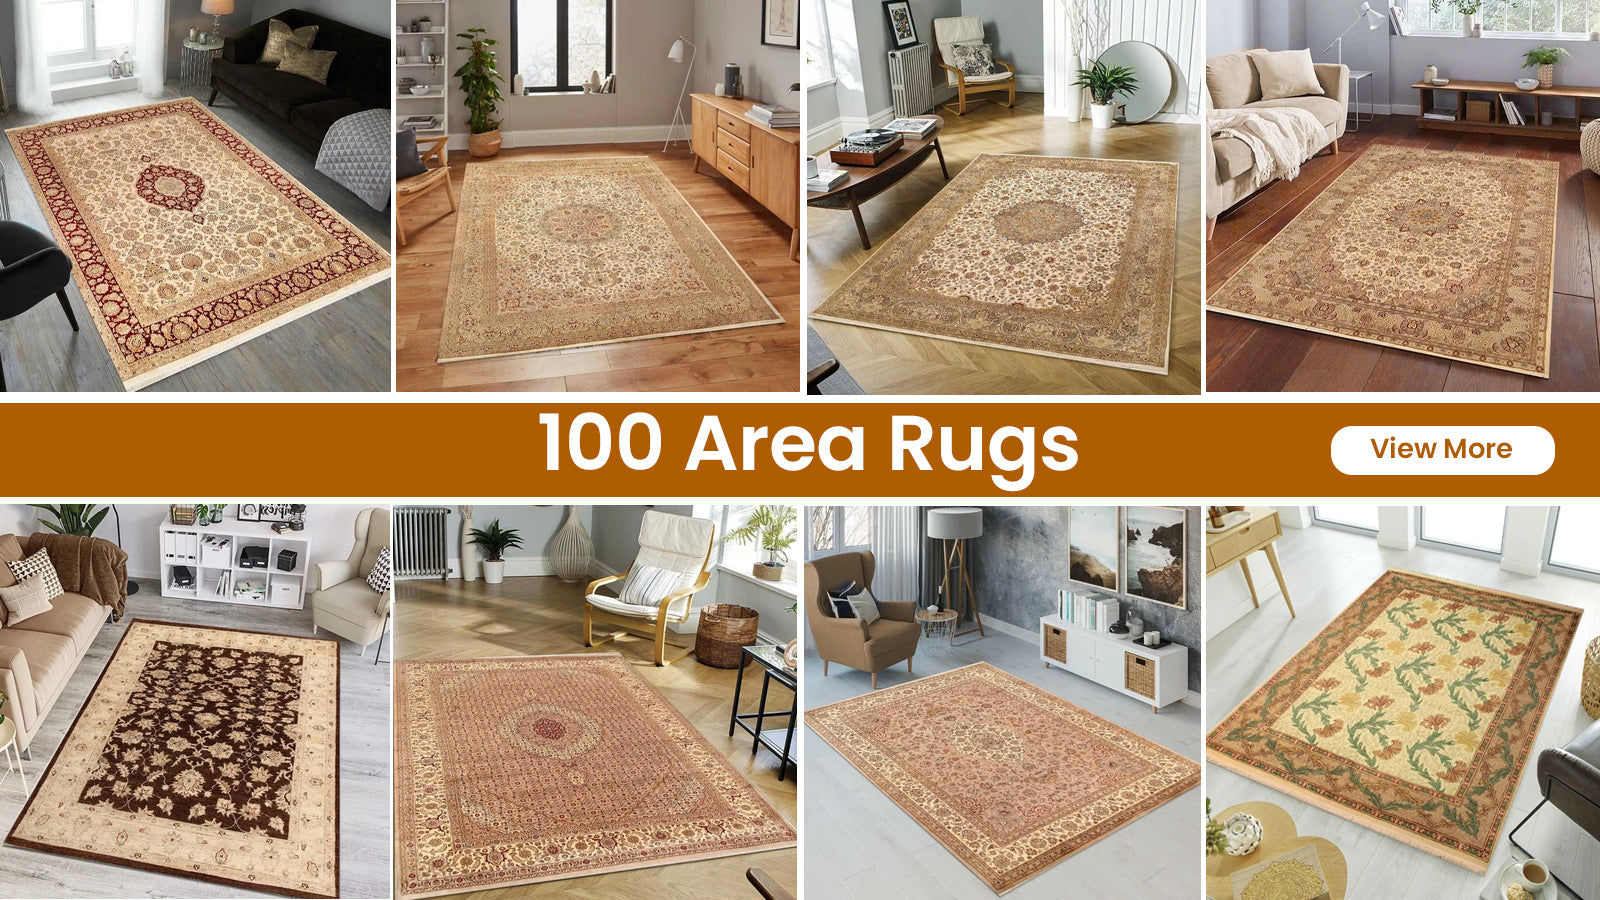 Rug Cleaning Costs Carpet S Ideas